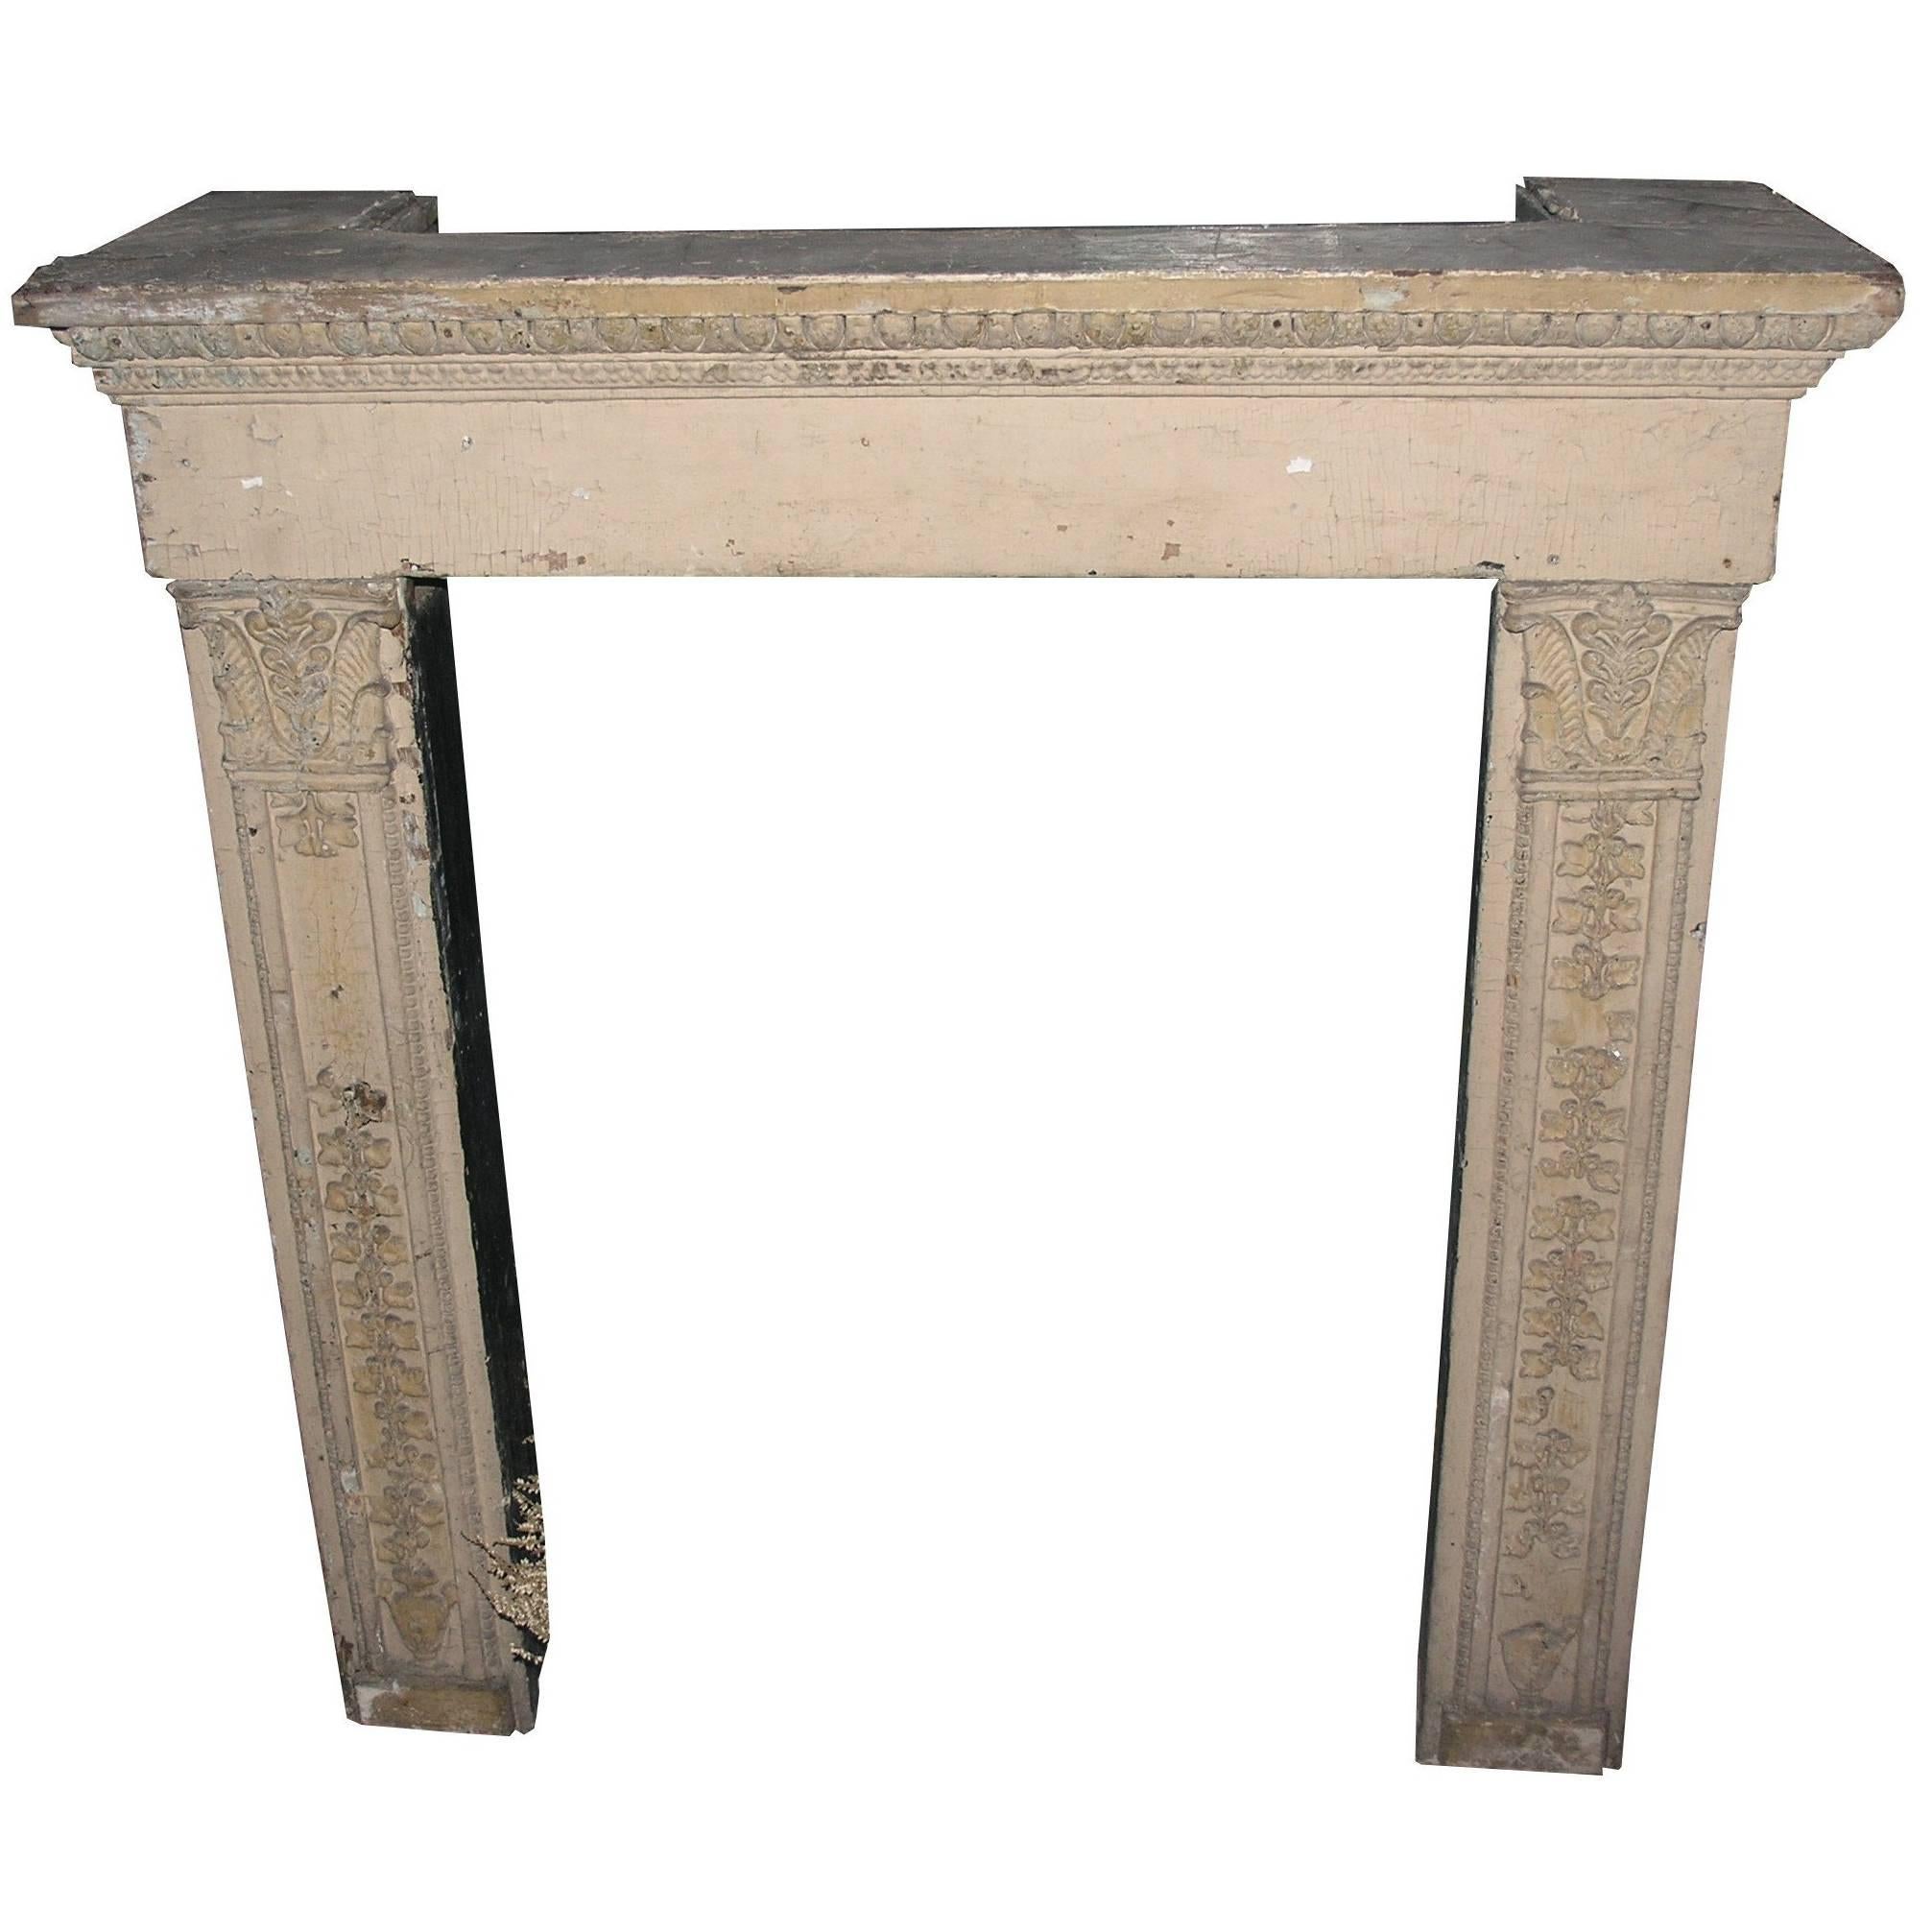 Antique Lacquered Fireplace Mantel